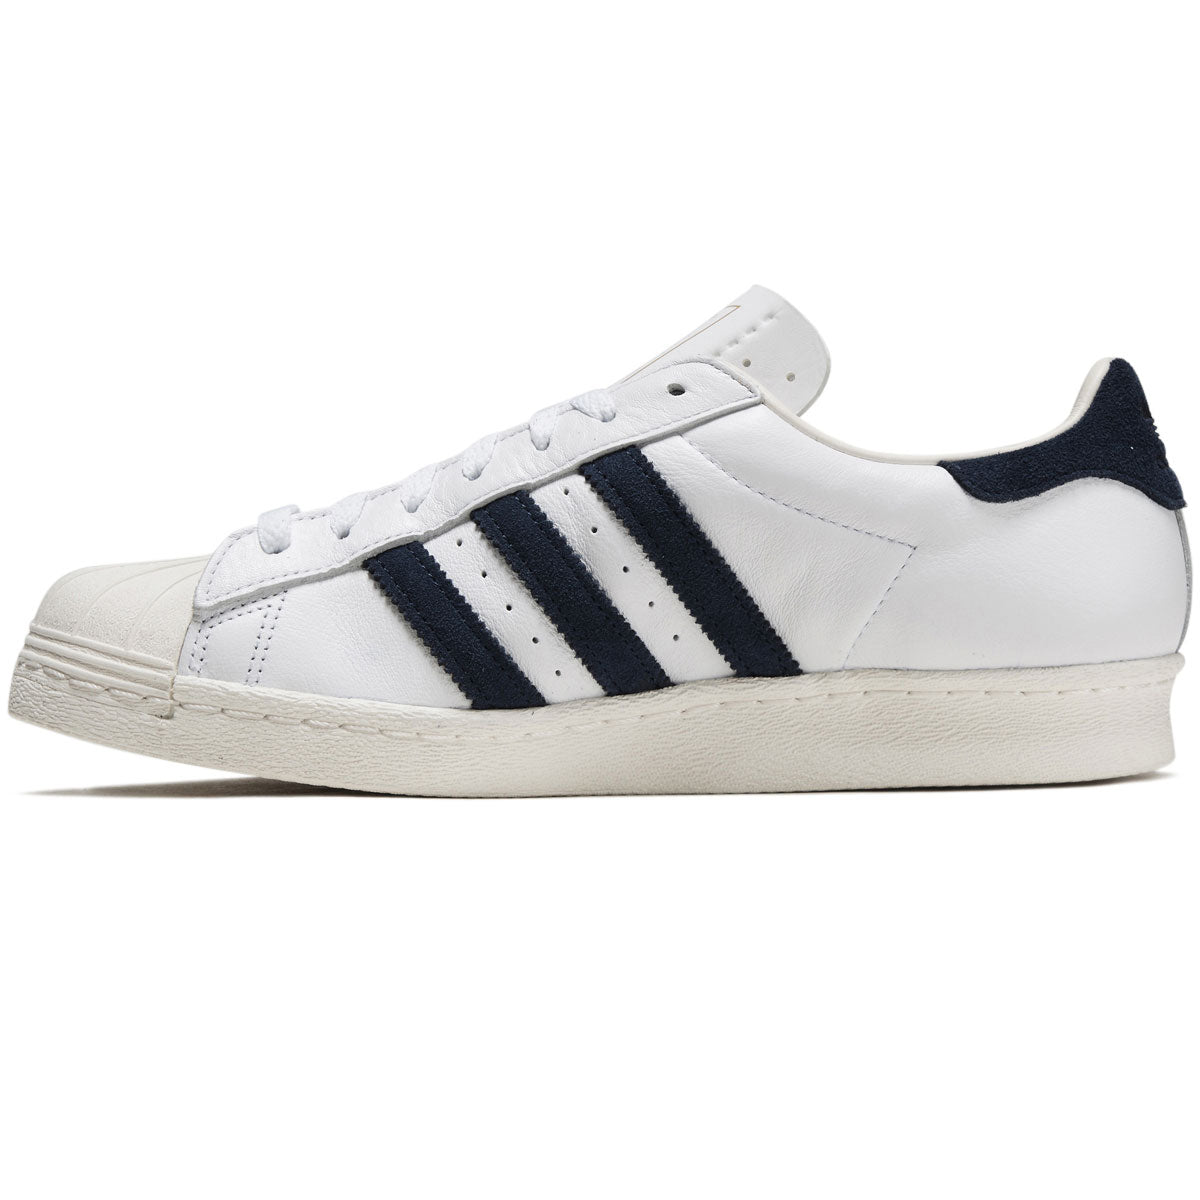 Adidas x Pop Trading Co Superstar Adv Shoes - White/Collegiate Navy/Ch – CCS